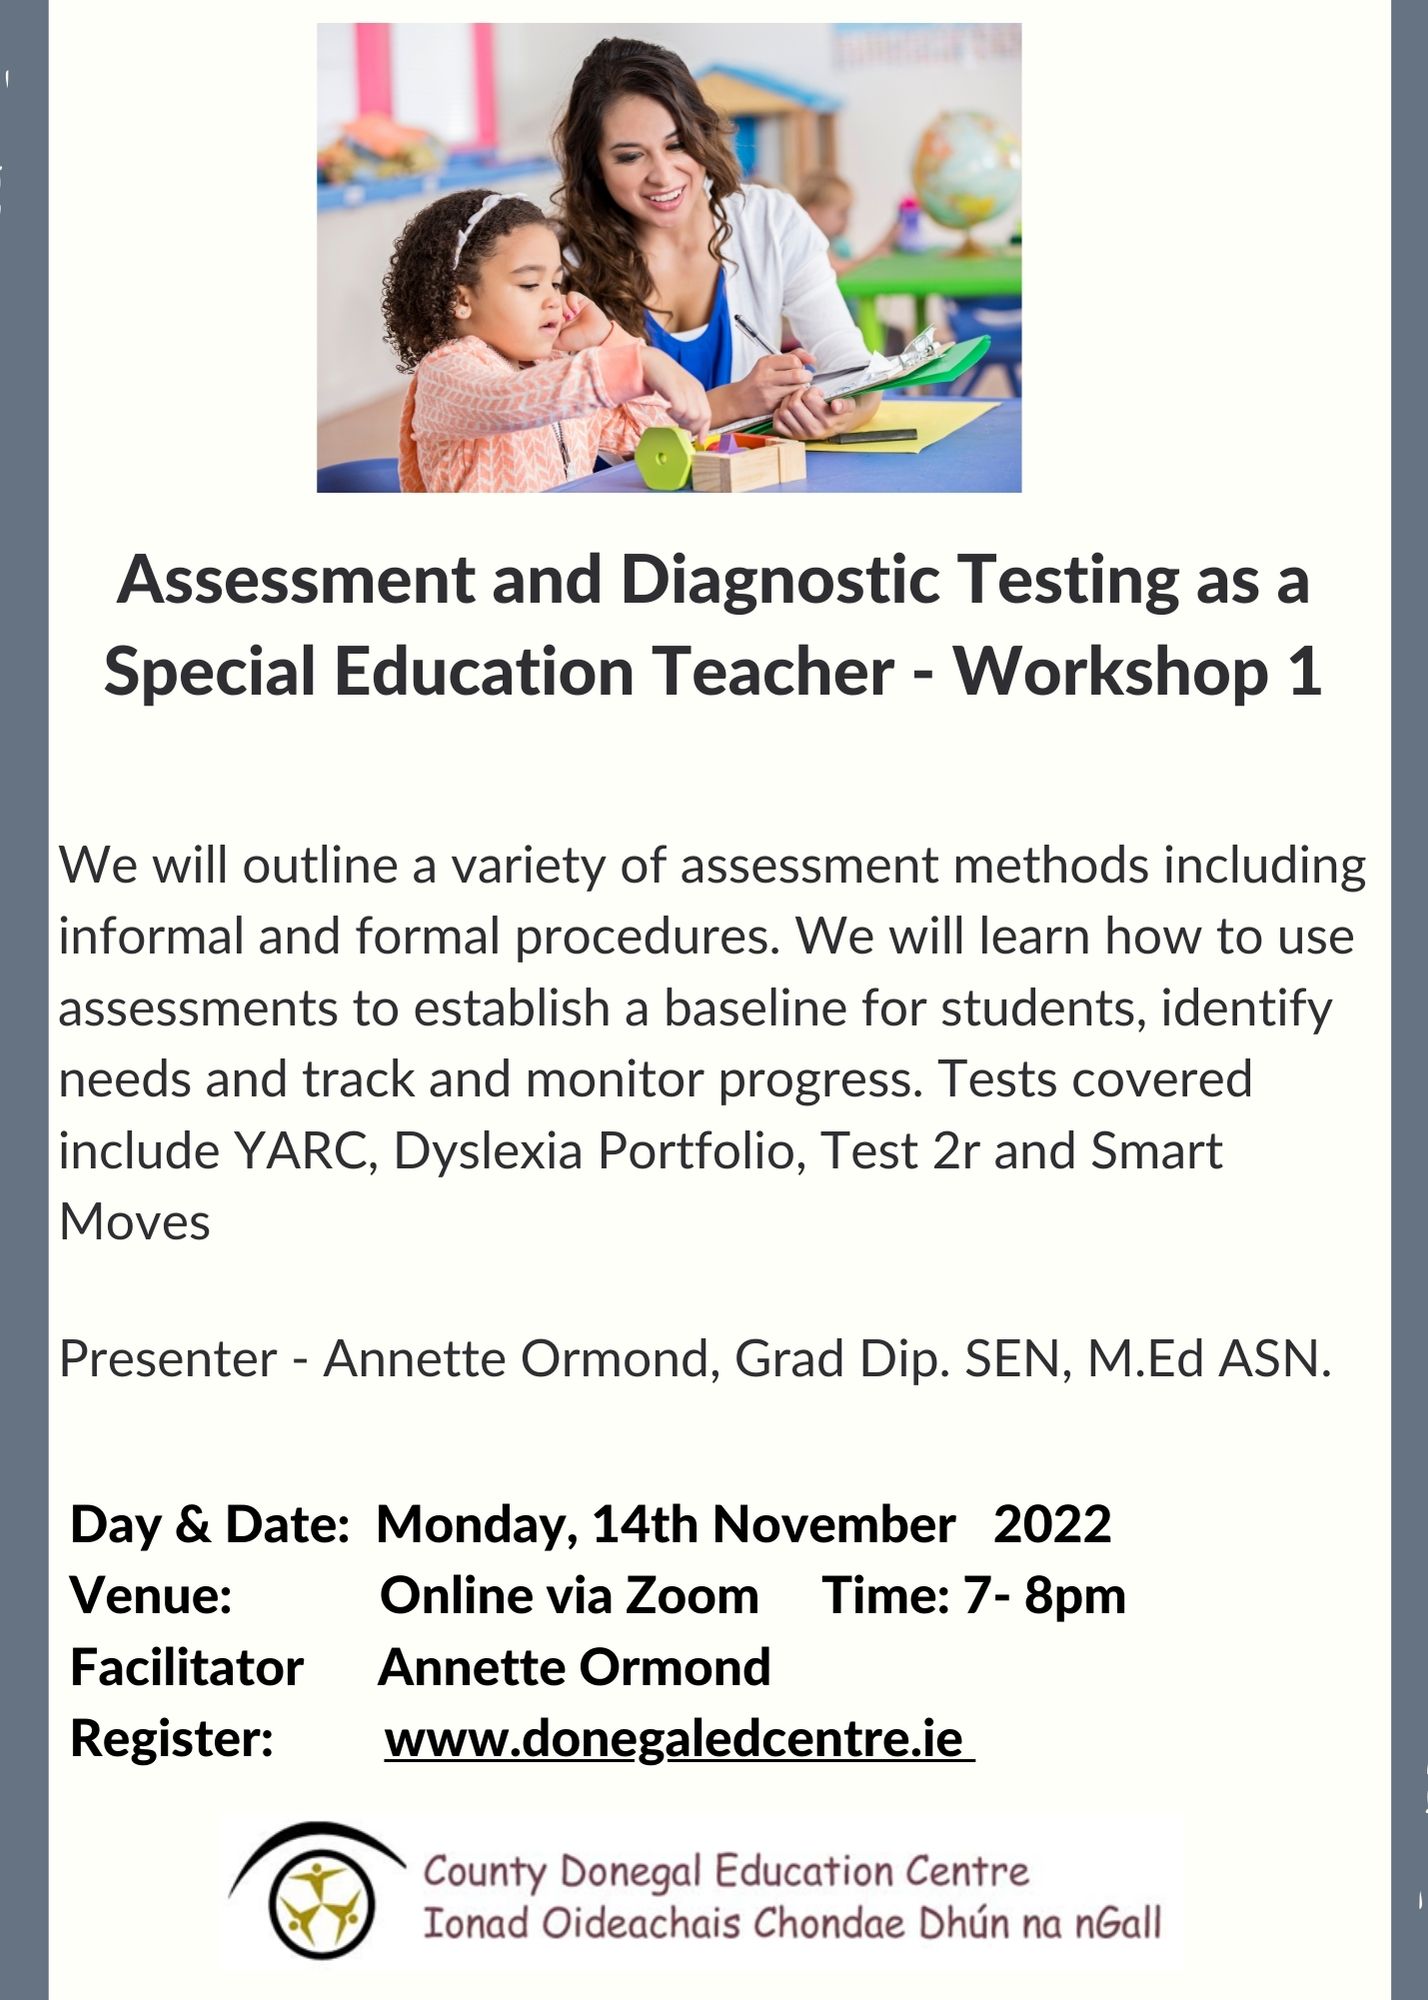 6.Assessment_and_Diagnostic_Testing_as_a_Special_Education_Teacher_workshop_1.jpg